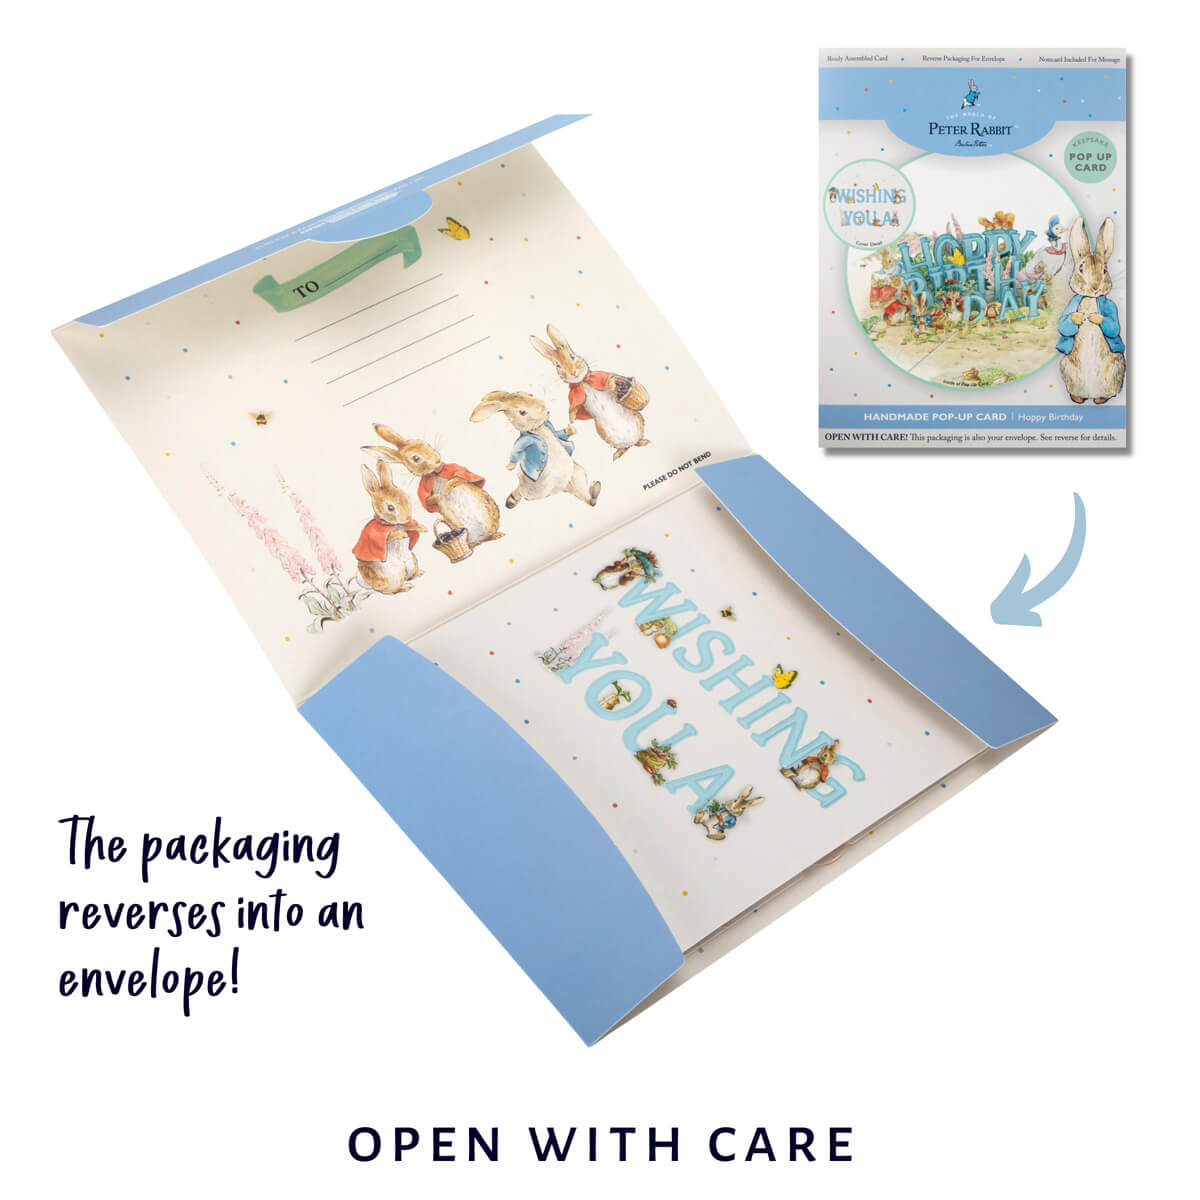 Peter Rabbit Birthday card reversible packaging which transforms into a gifting envelope